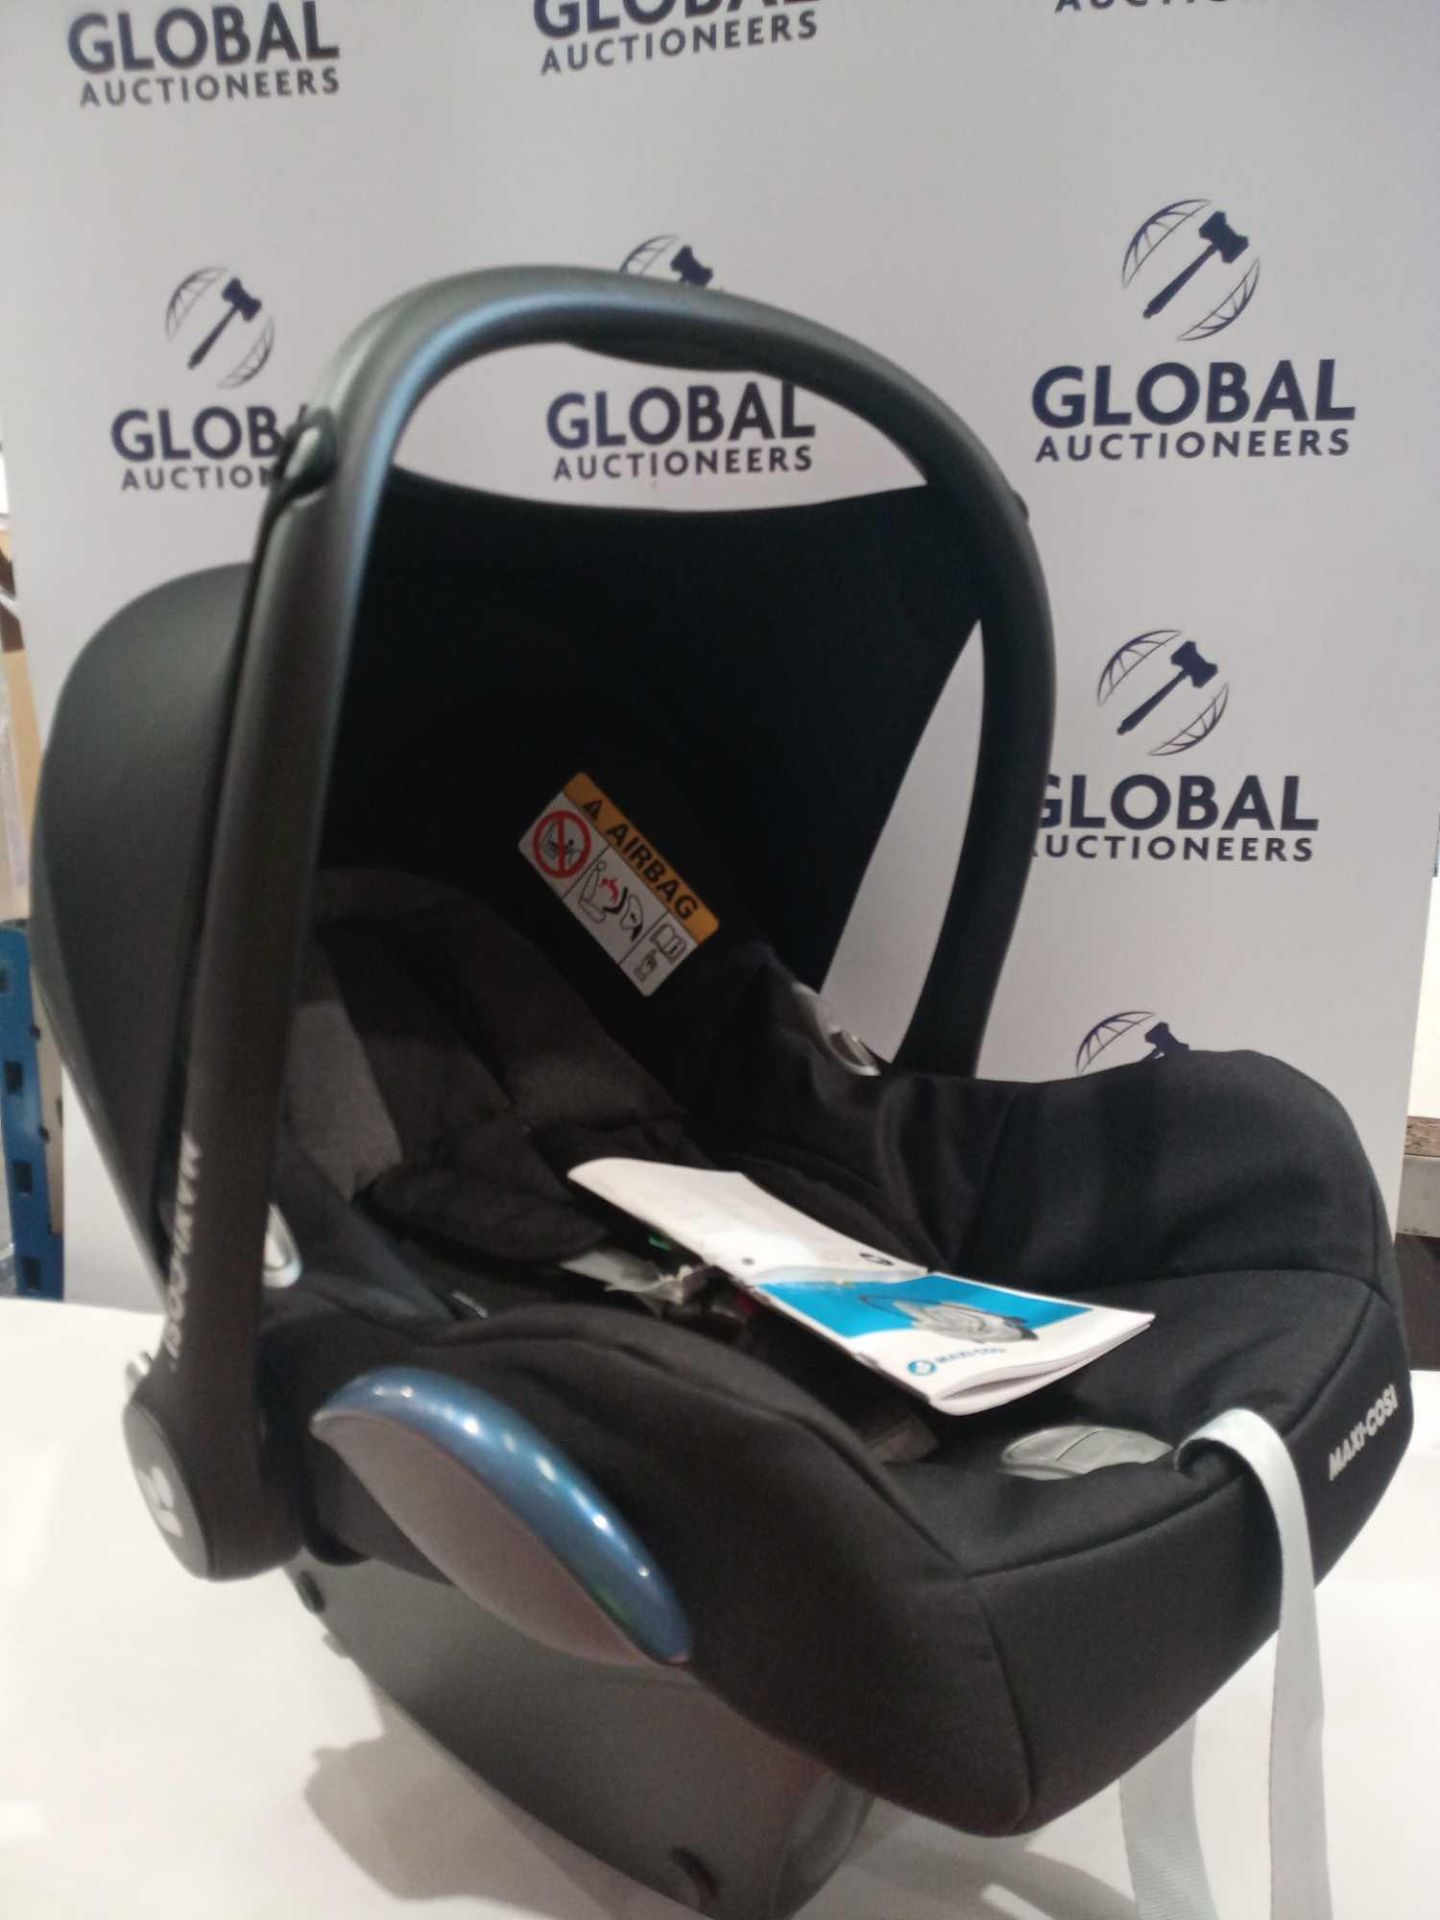 Rrp £105 Unboxed Maxi Cosi Cabriofix Baby Safety Car Seat - Image 2 of 2